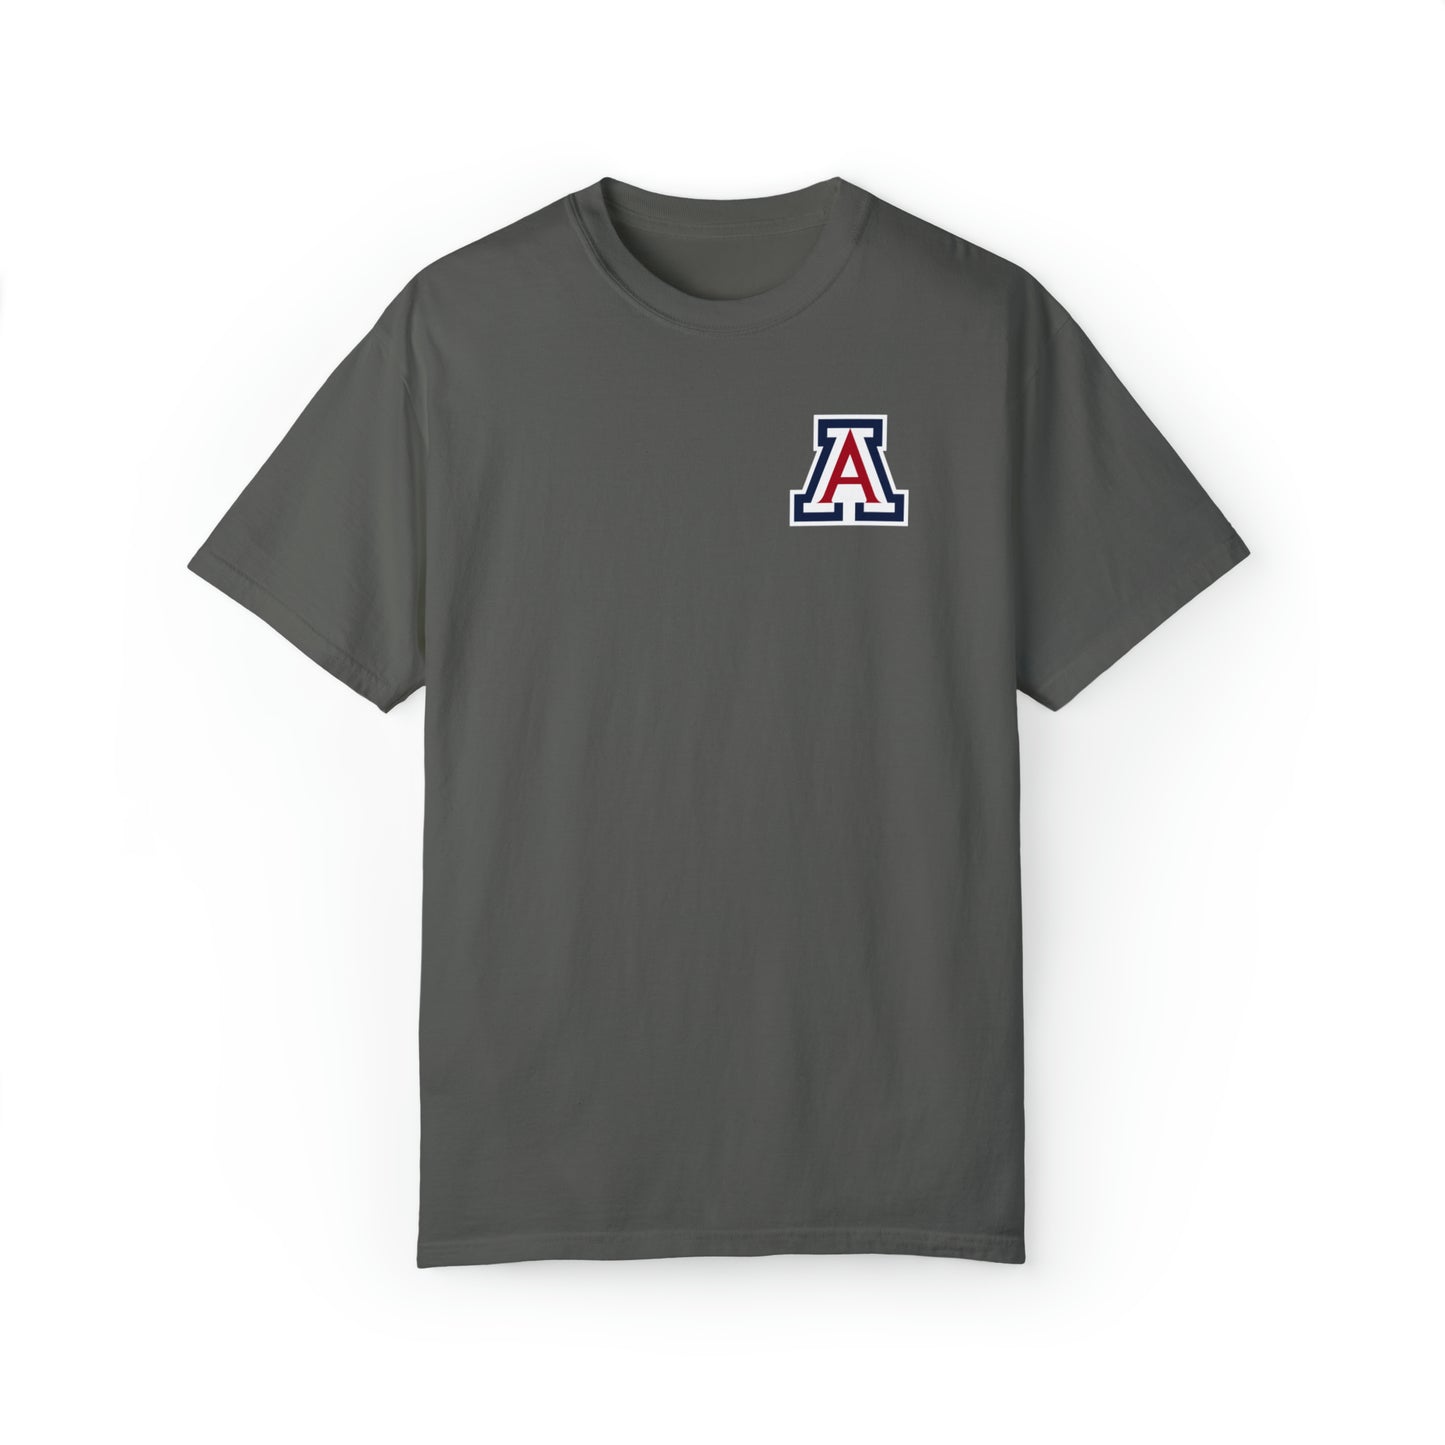 Wildcats Game Day Shirt